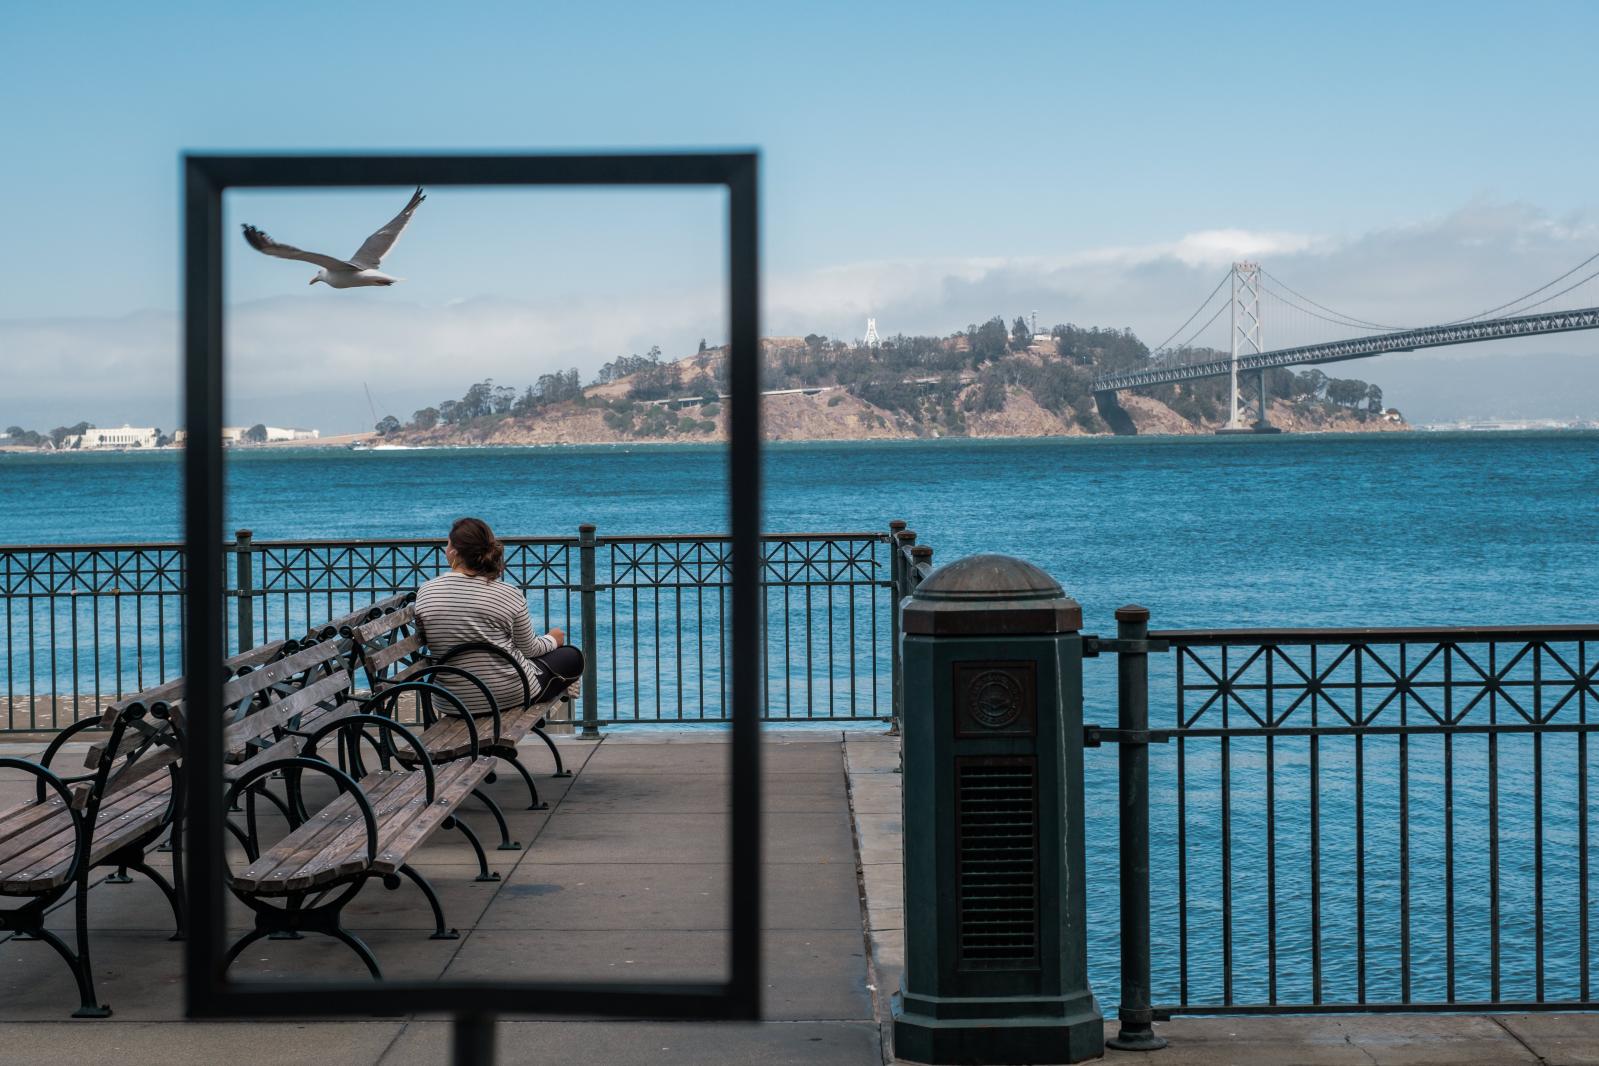 Image from NEWS FEATURES - SAN FRANCISCO, CA - AUGUST 5: A woman looks out over the...